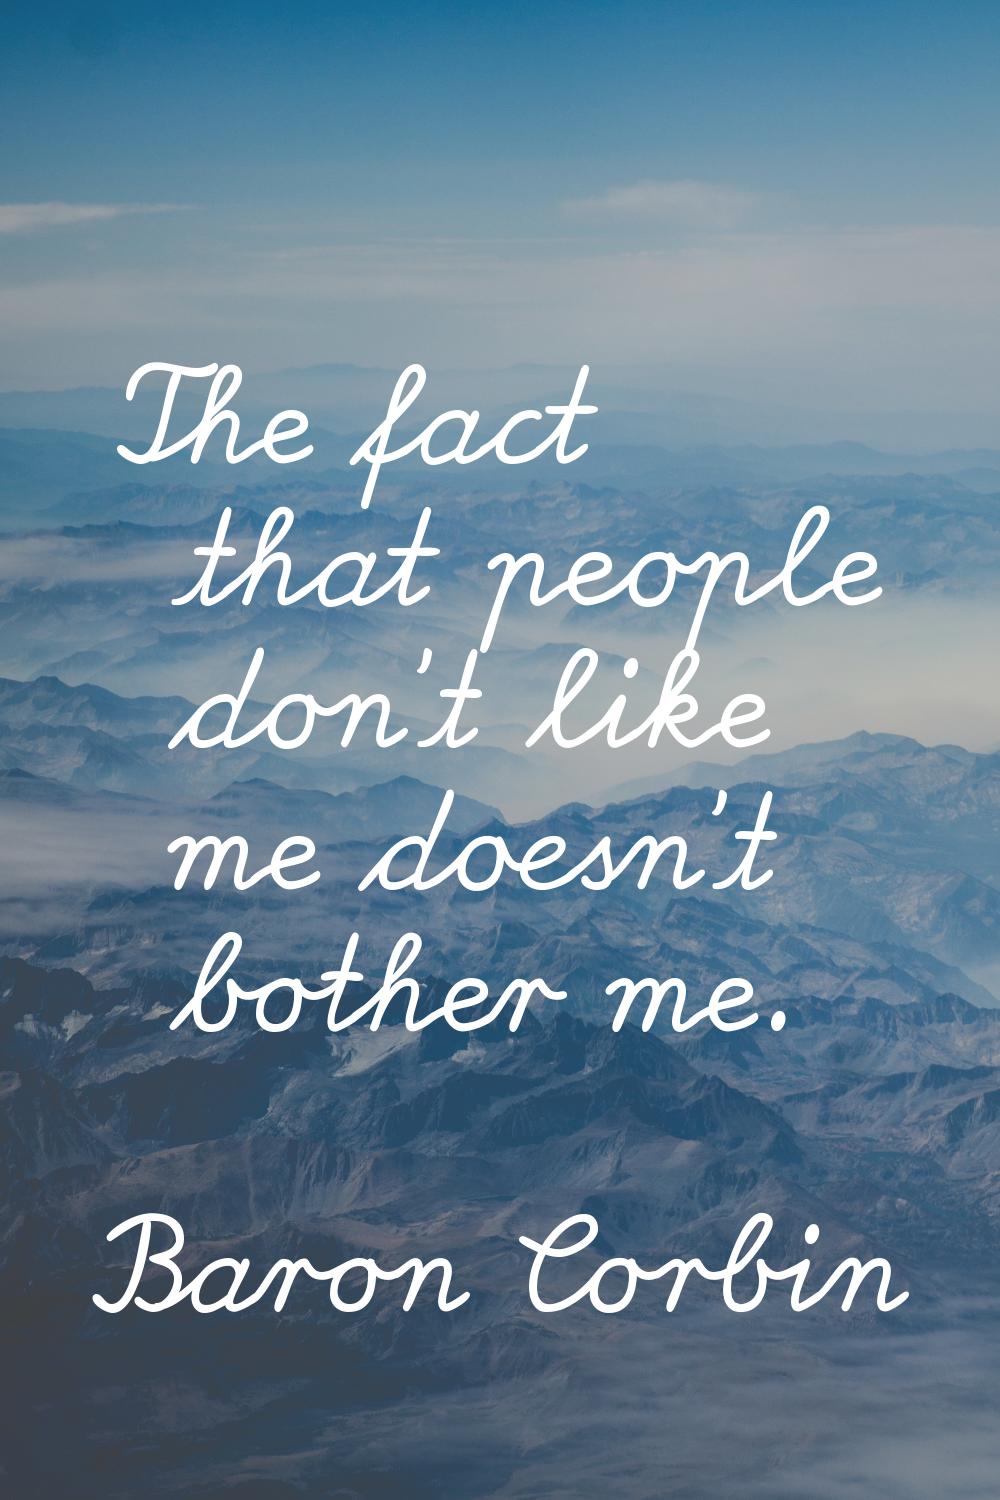 The fact that people don't like me doesn't bother me.